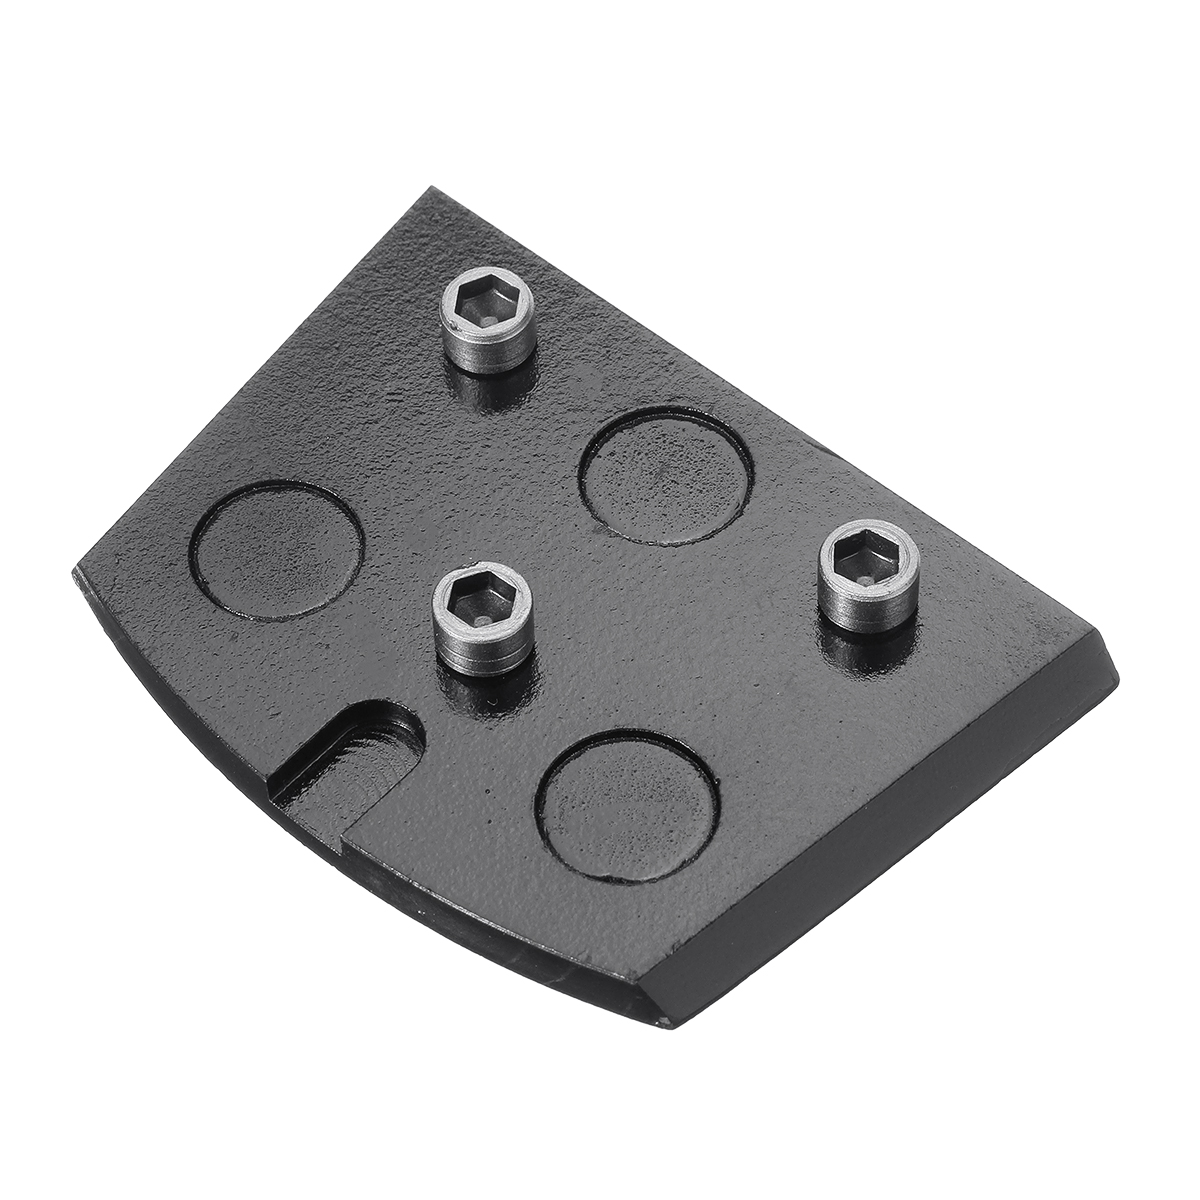 Trapezoid-Griinding-Head-Adapter-For-Lavina-Grinder-Grinding-Polishing-Machine-1585129-3